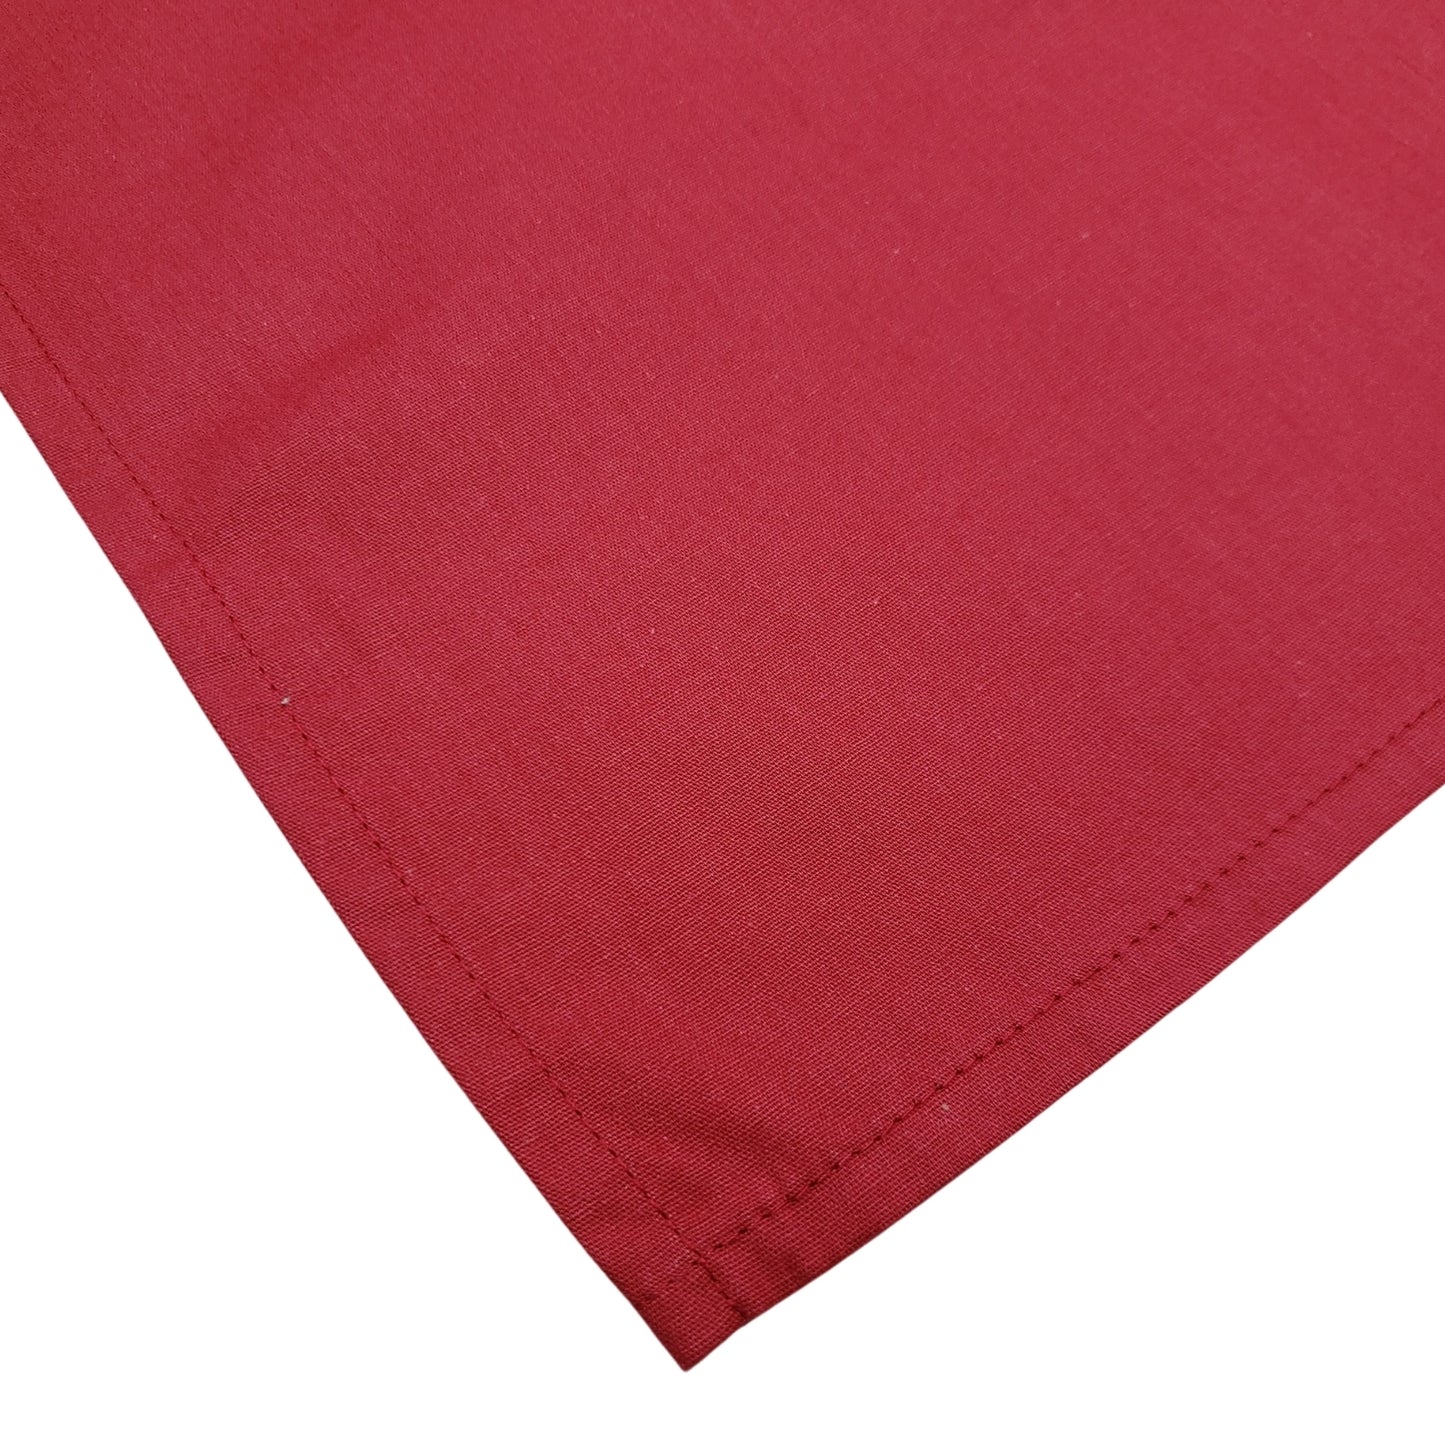 Charlo's Set of 4 100% Red Christmas Solid Cotton Cloth Napkins 18" by 18" Washable Reusable